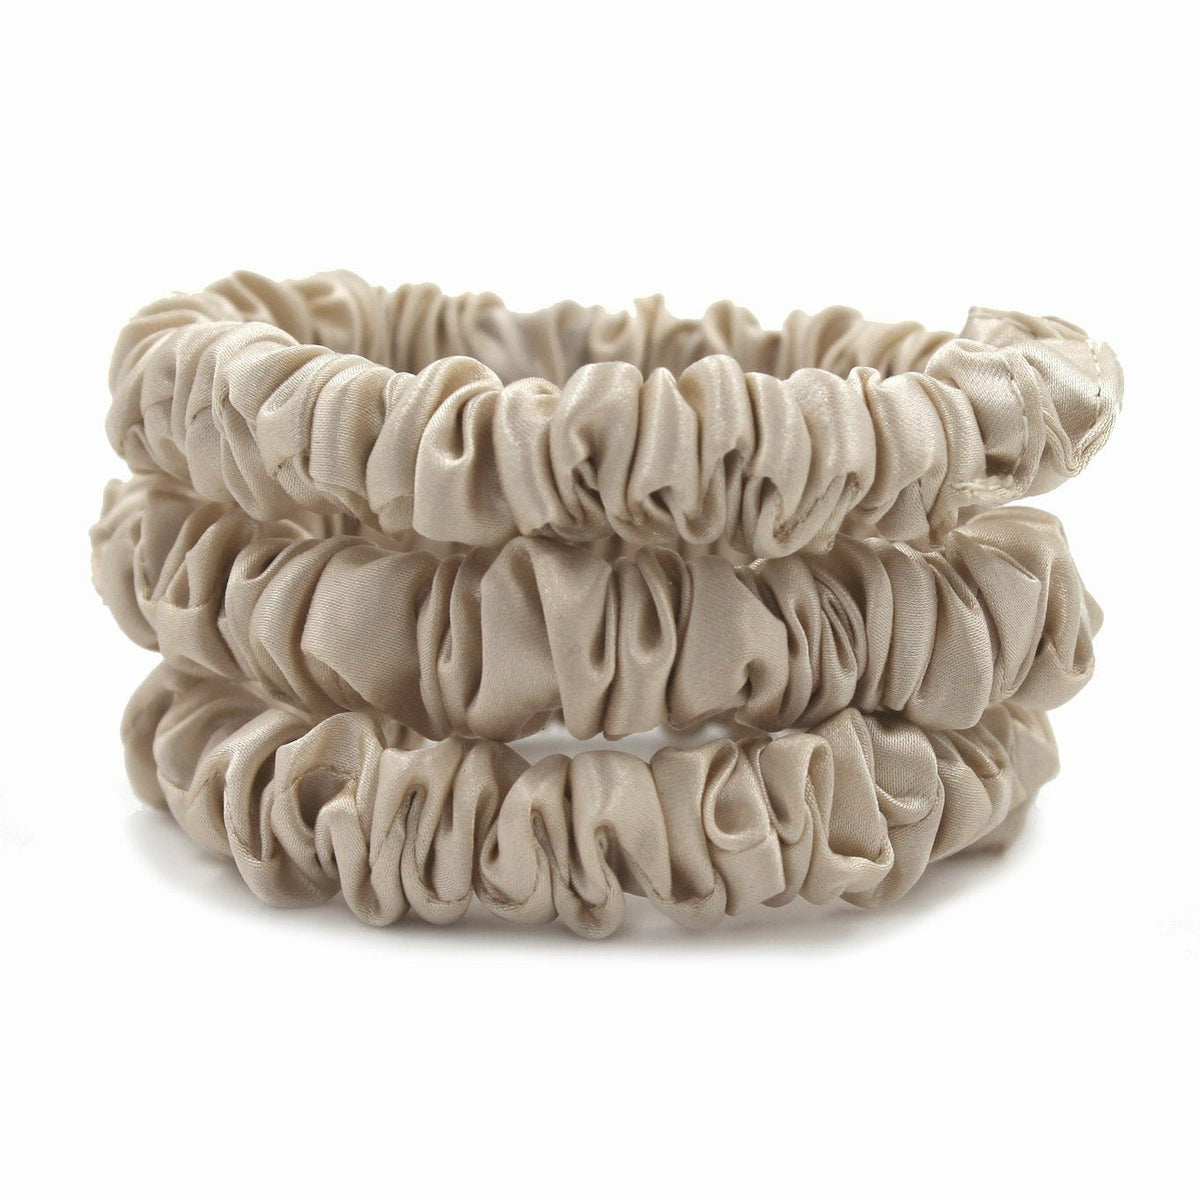 Small Sand Scrunchies Stack